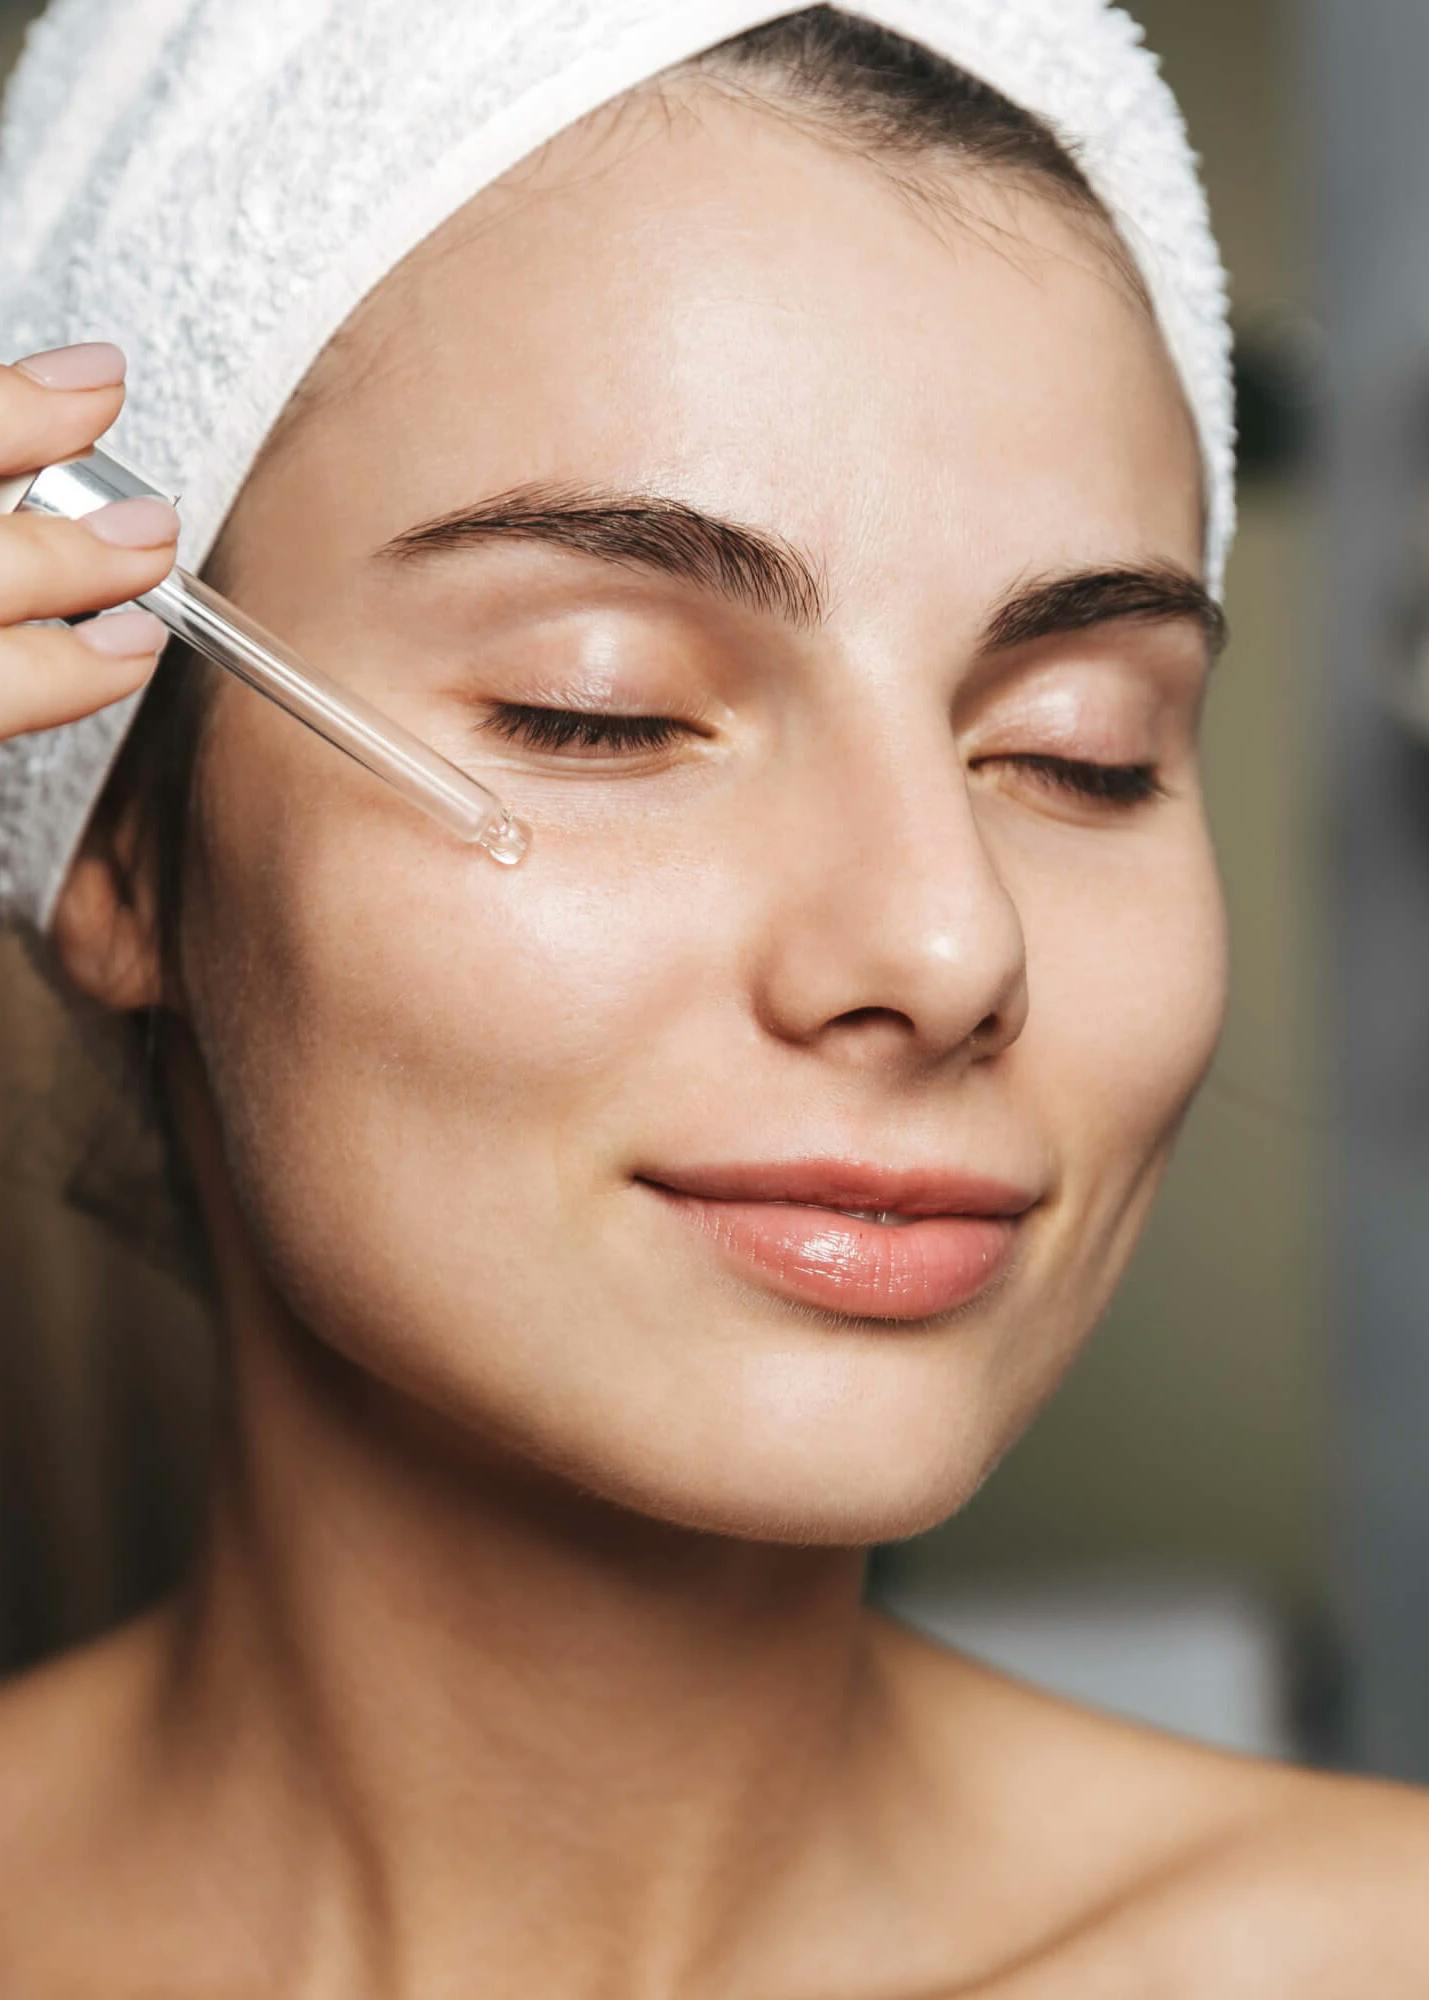 The Best Anti-Aging Undereye Products For Fine Lines, Dark Circles, And More shutterstock